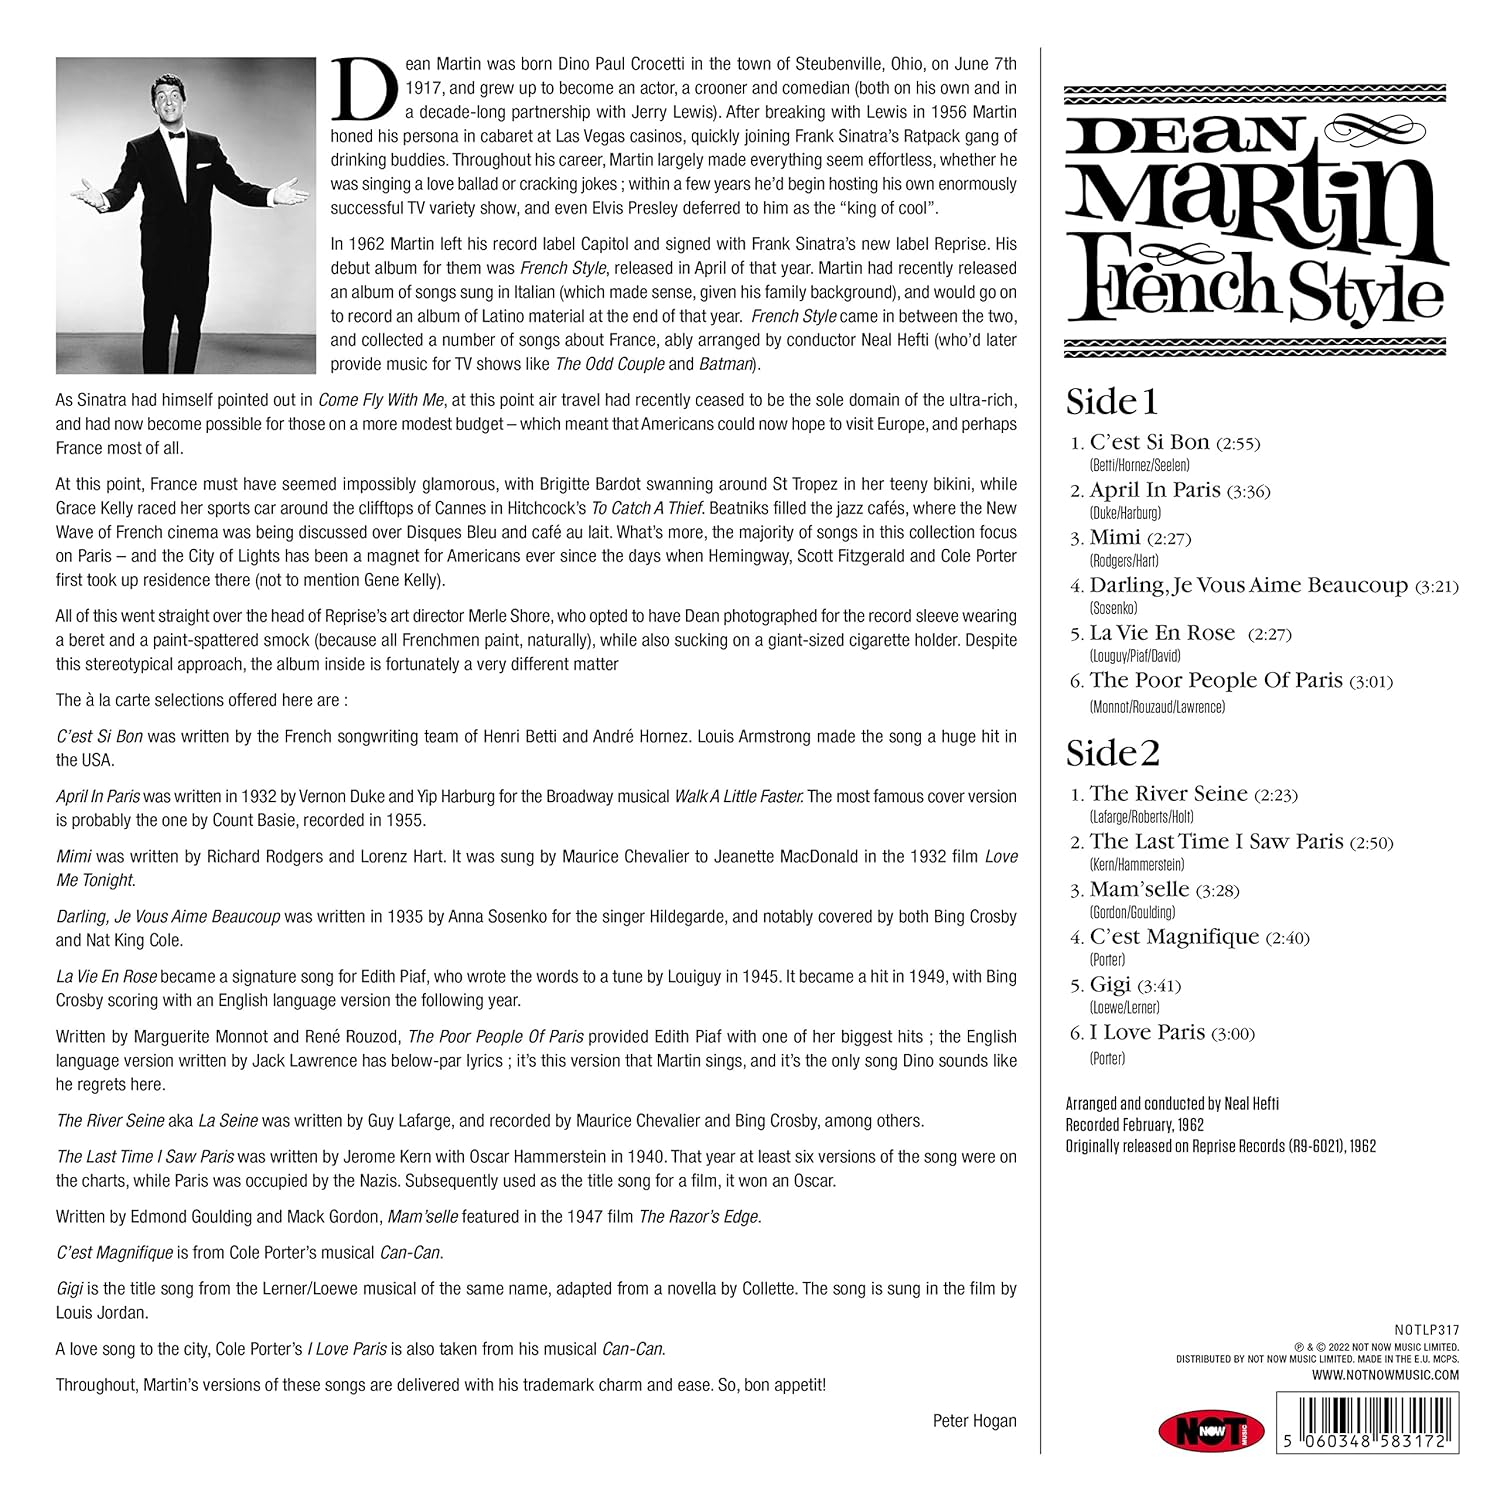 MARTIN DEAN – FRENCH STYLE colored vinyl LP